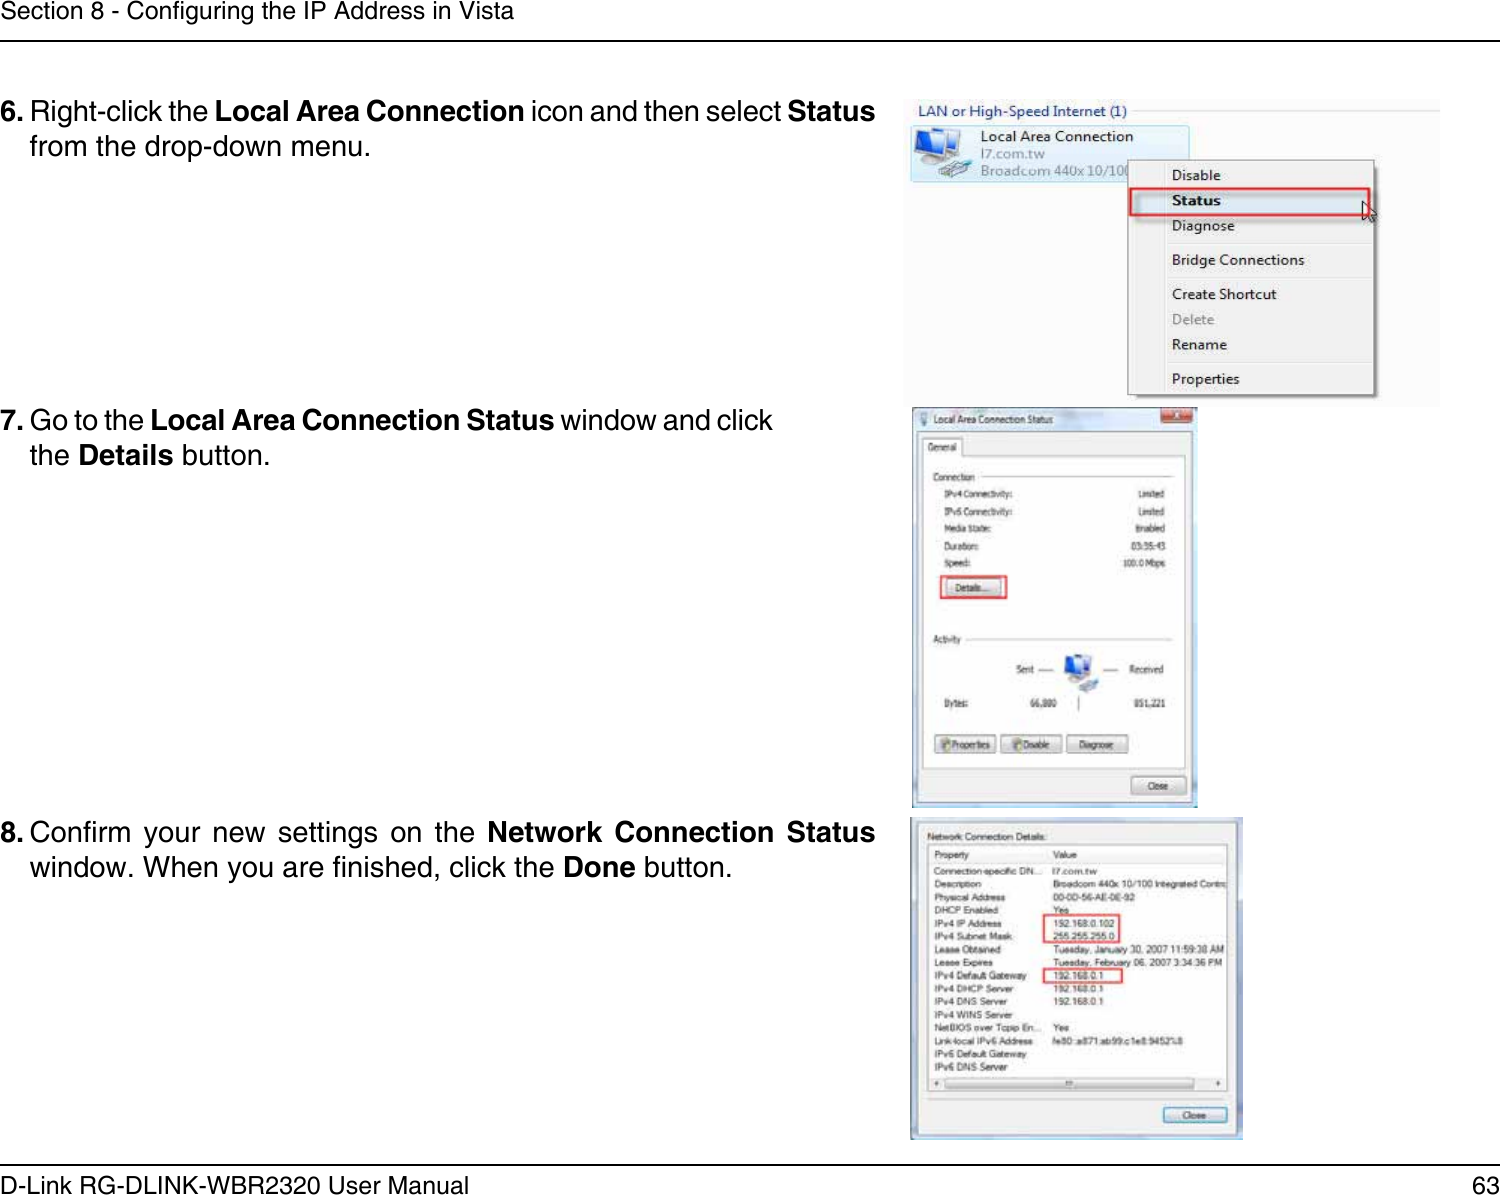 63D-Link RG-DLINK-WBR2320 User ManualSection 8 - Conguring the IP Address in Vista6. Right-click the Local Area Connection icon and then select Status from the drop-down menu. 7. Go to the Local Area Connection Status window and click the Details button. 8. Conrm  your  new  settings  on  the  Network  Connection  Status window. When you are nished, click the Done button. 